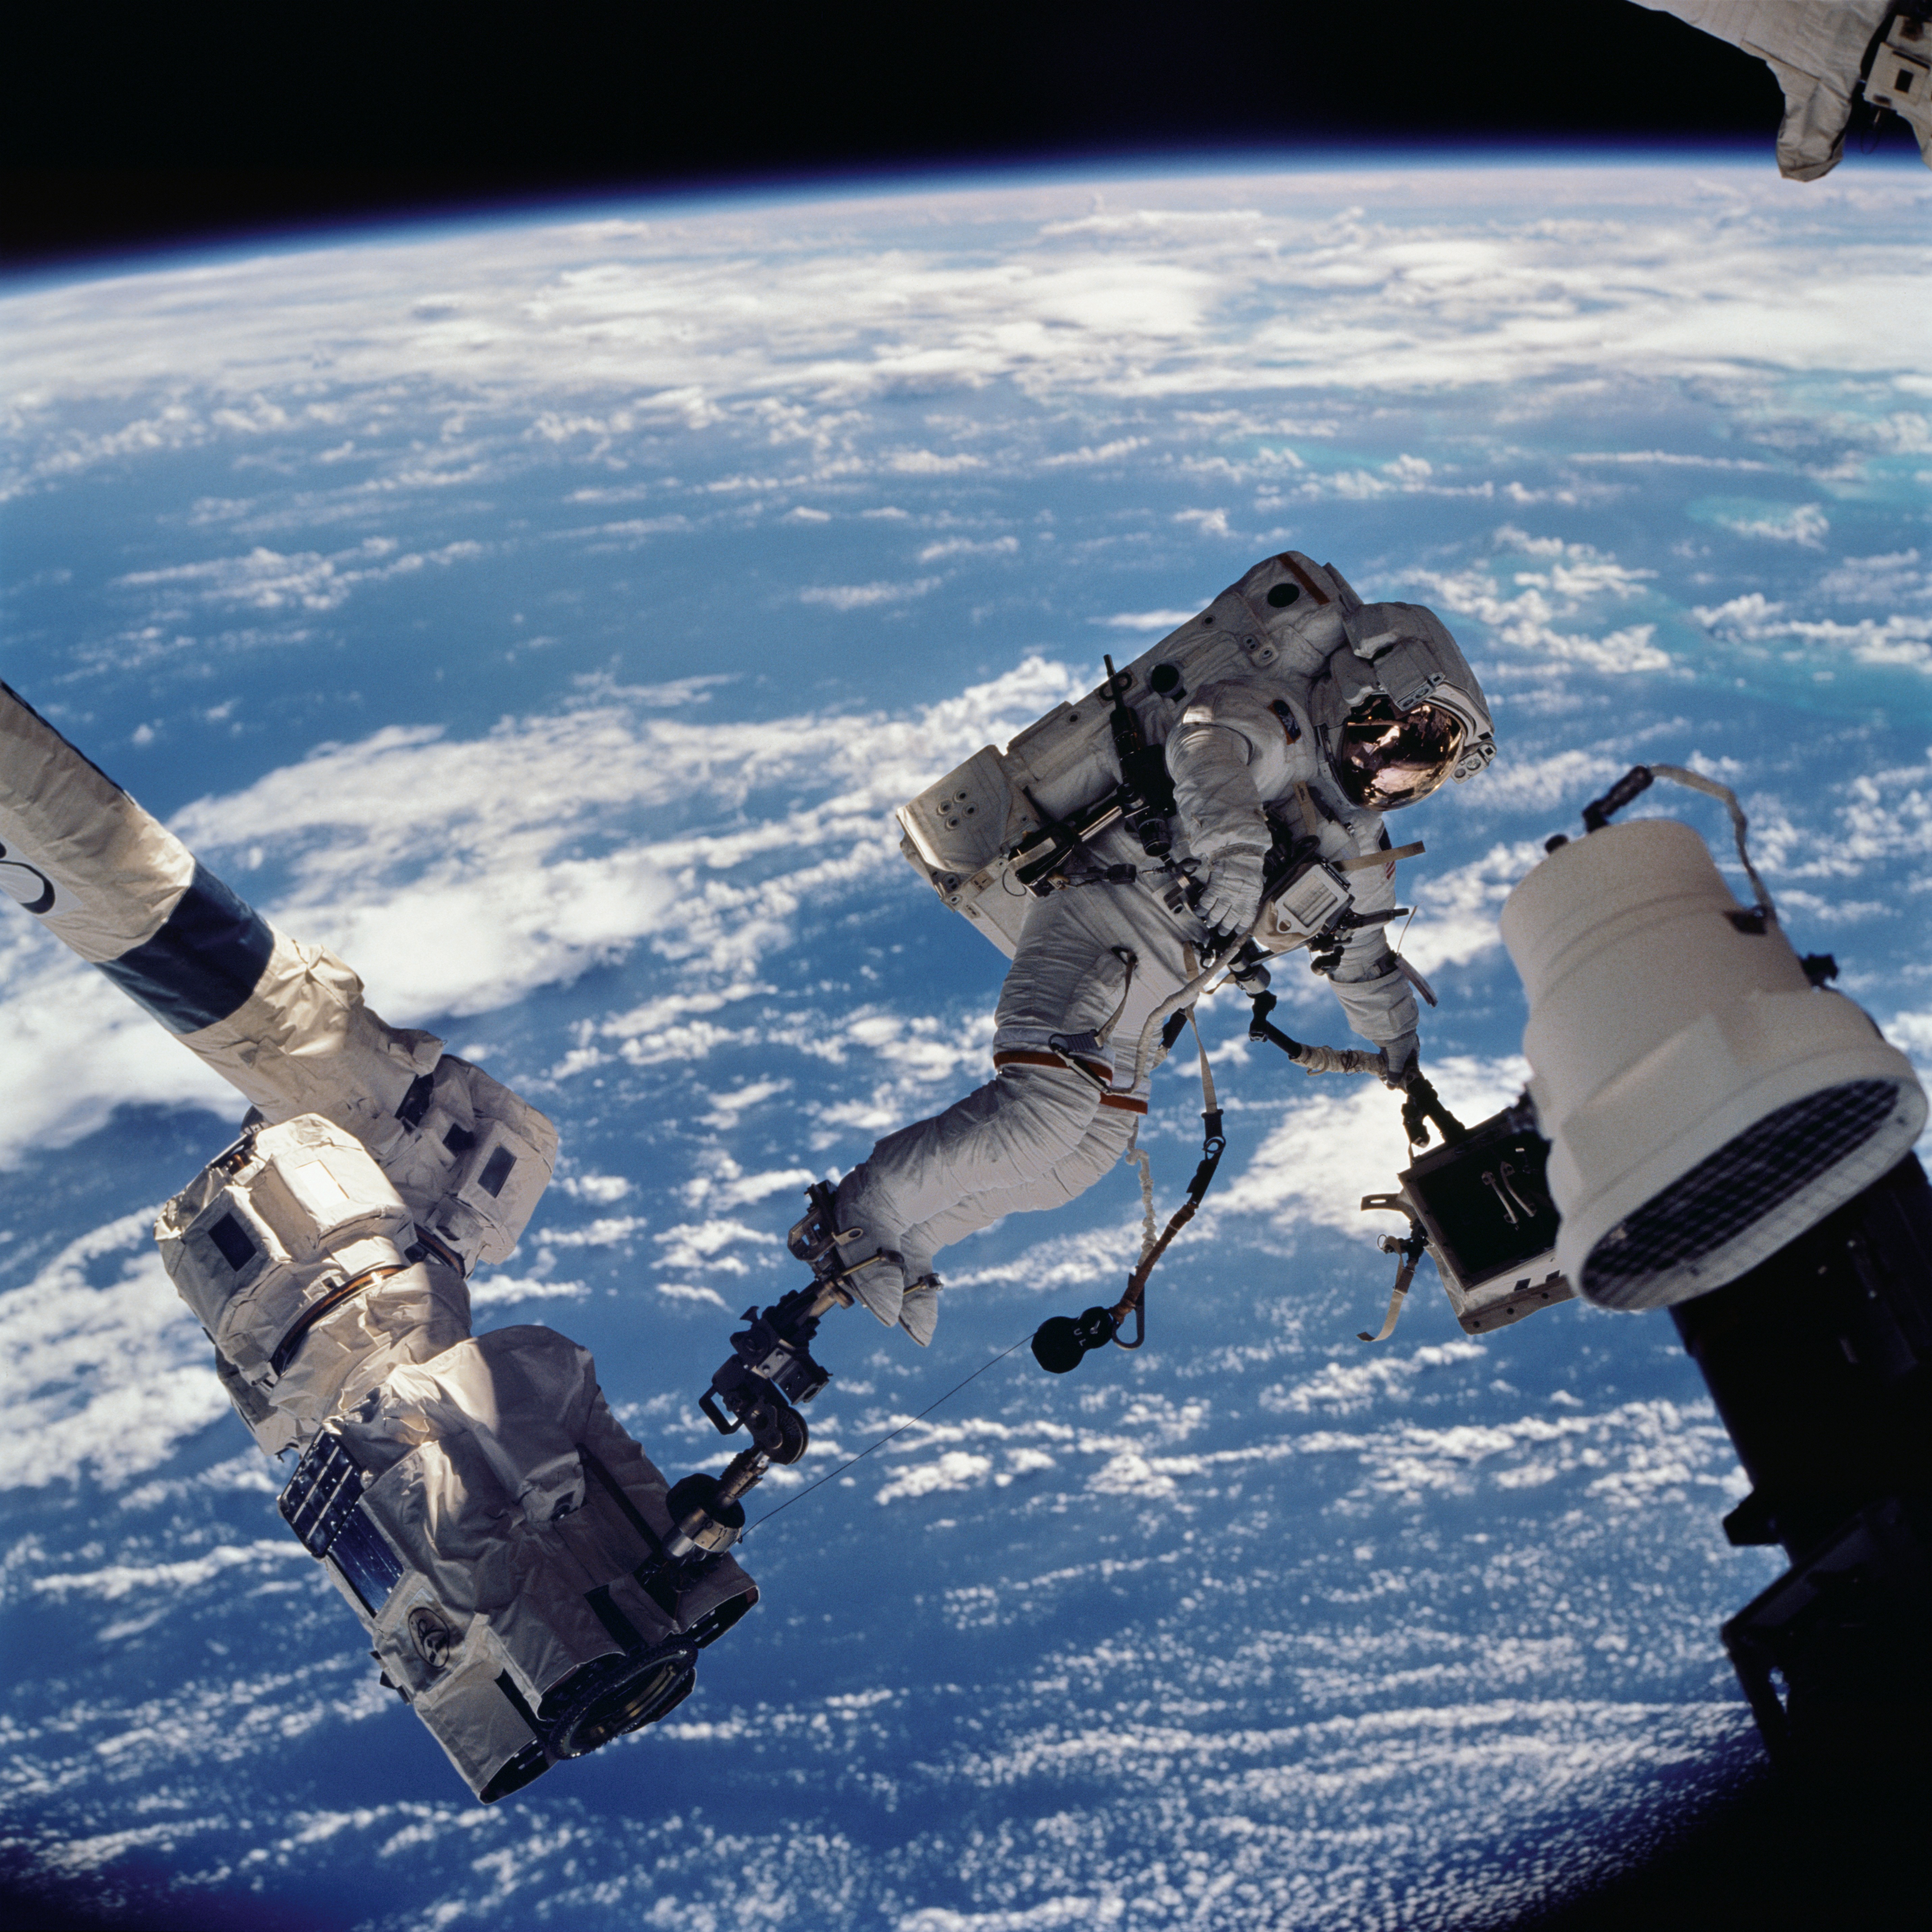 STS-82 rocketed to orbit 19 years ago today